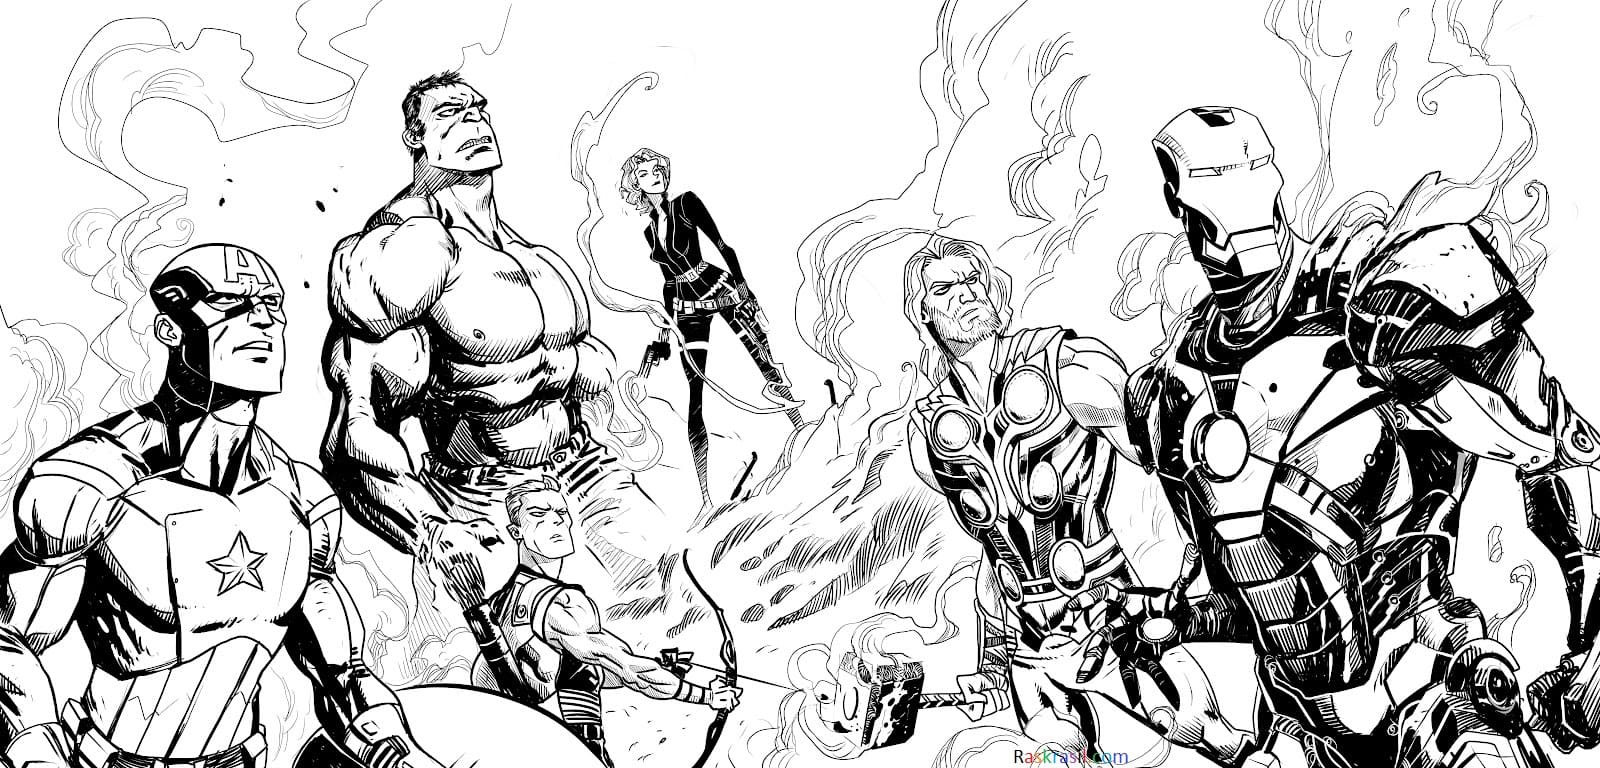 Avengers 21 of Avengers coloring page to print and color